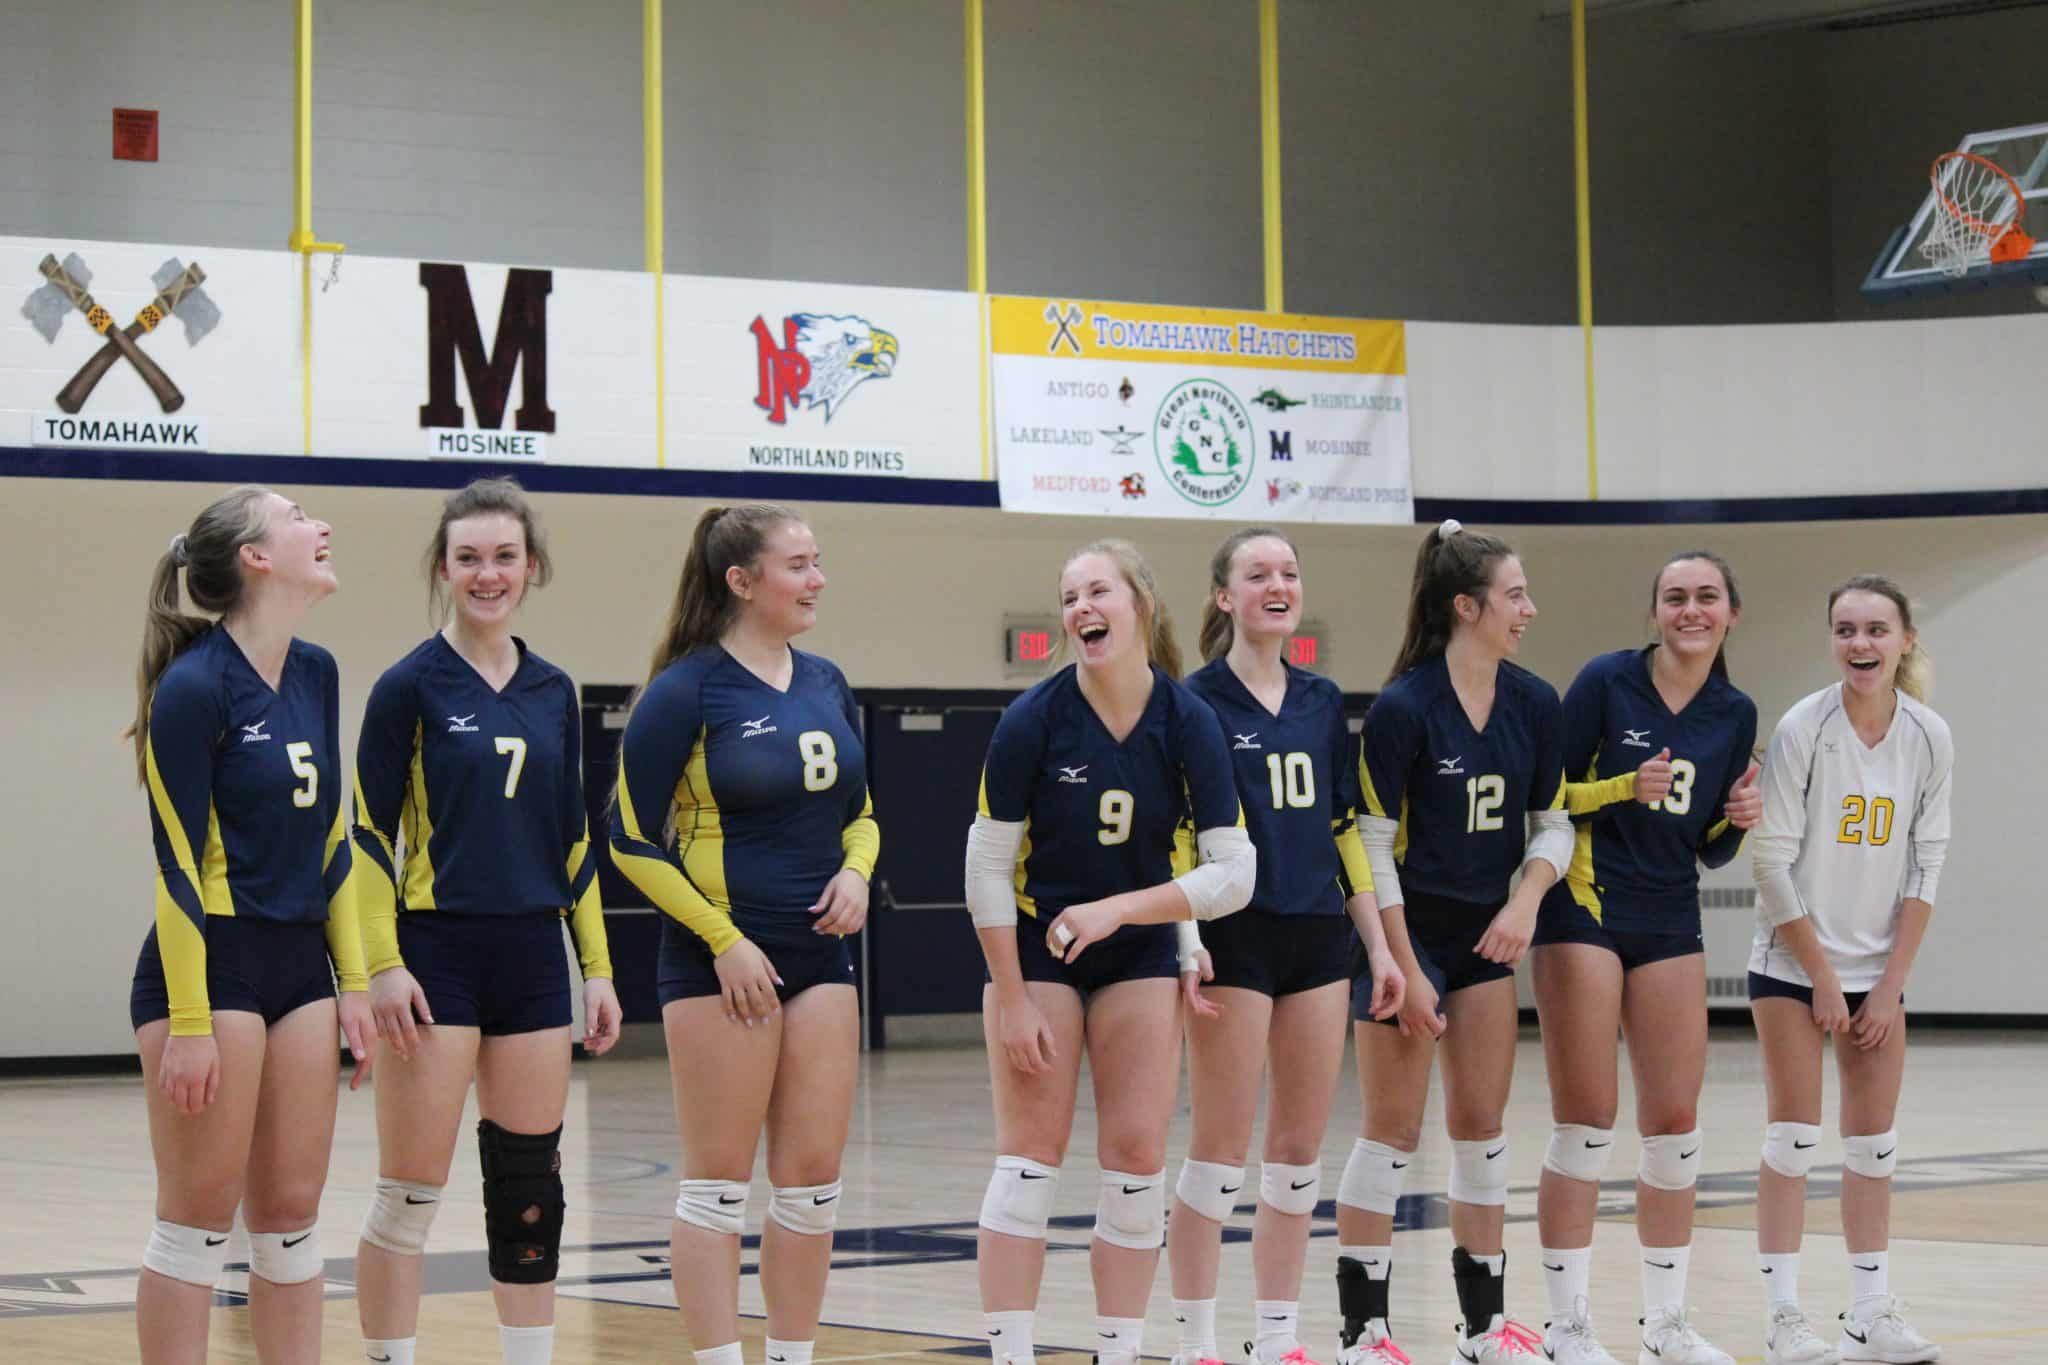 Hatchet spikers finish out regular season strong with 3-1 win over Rhinelander